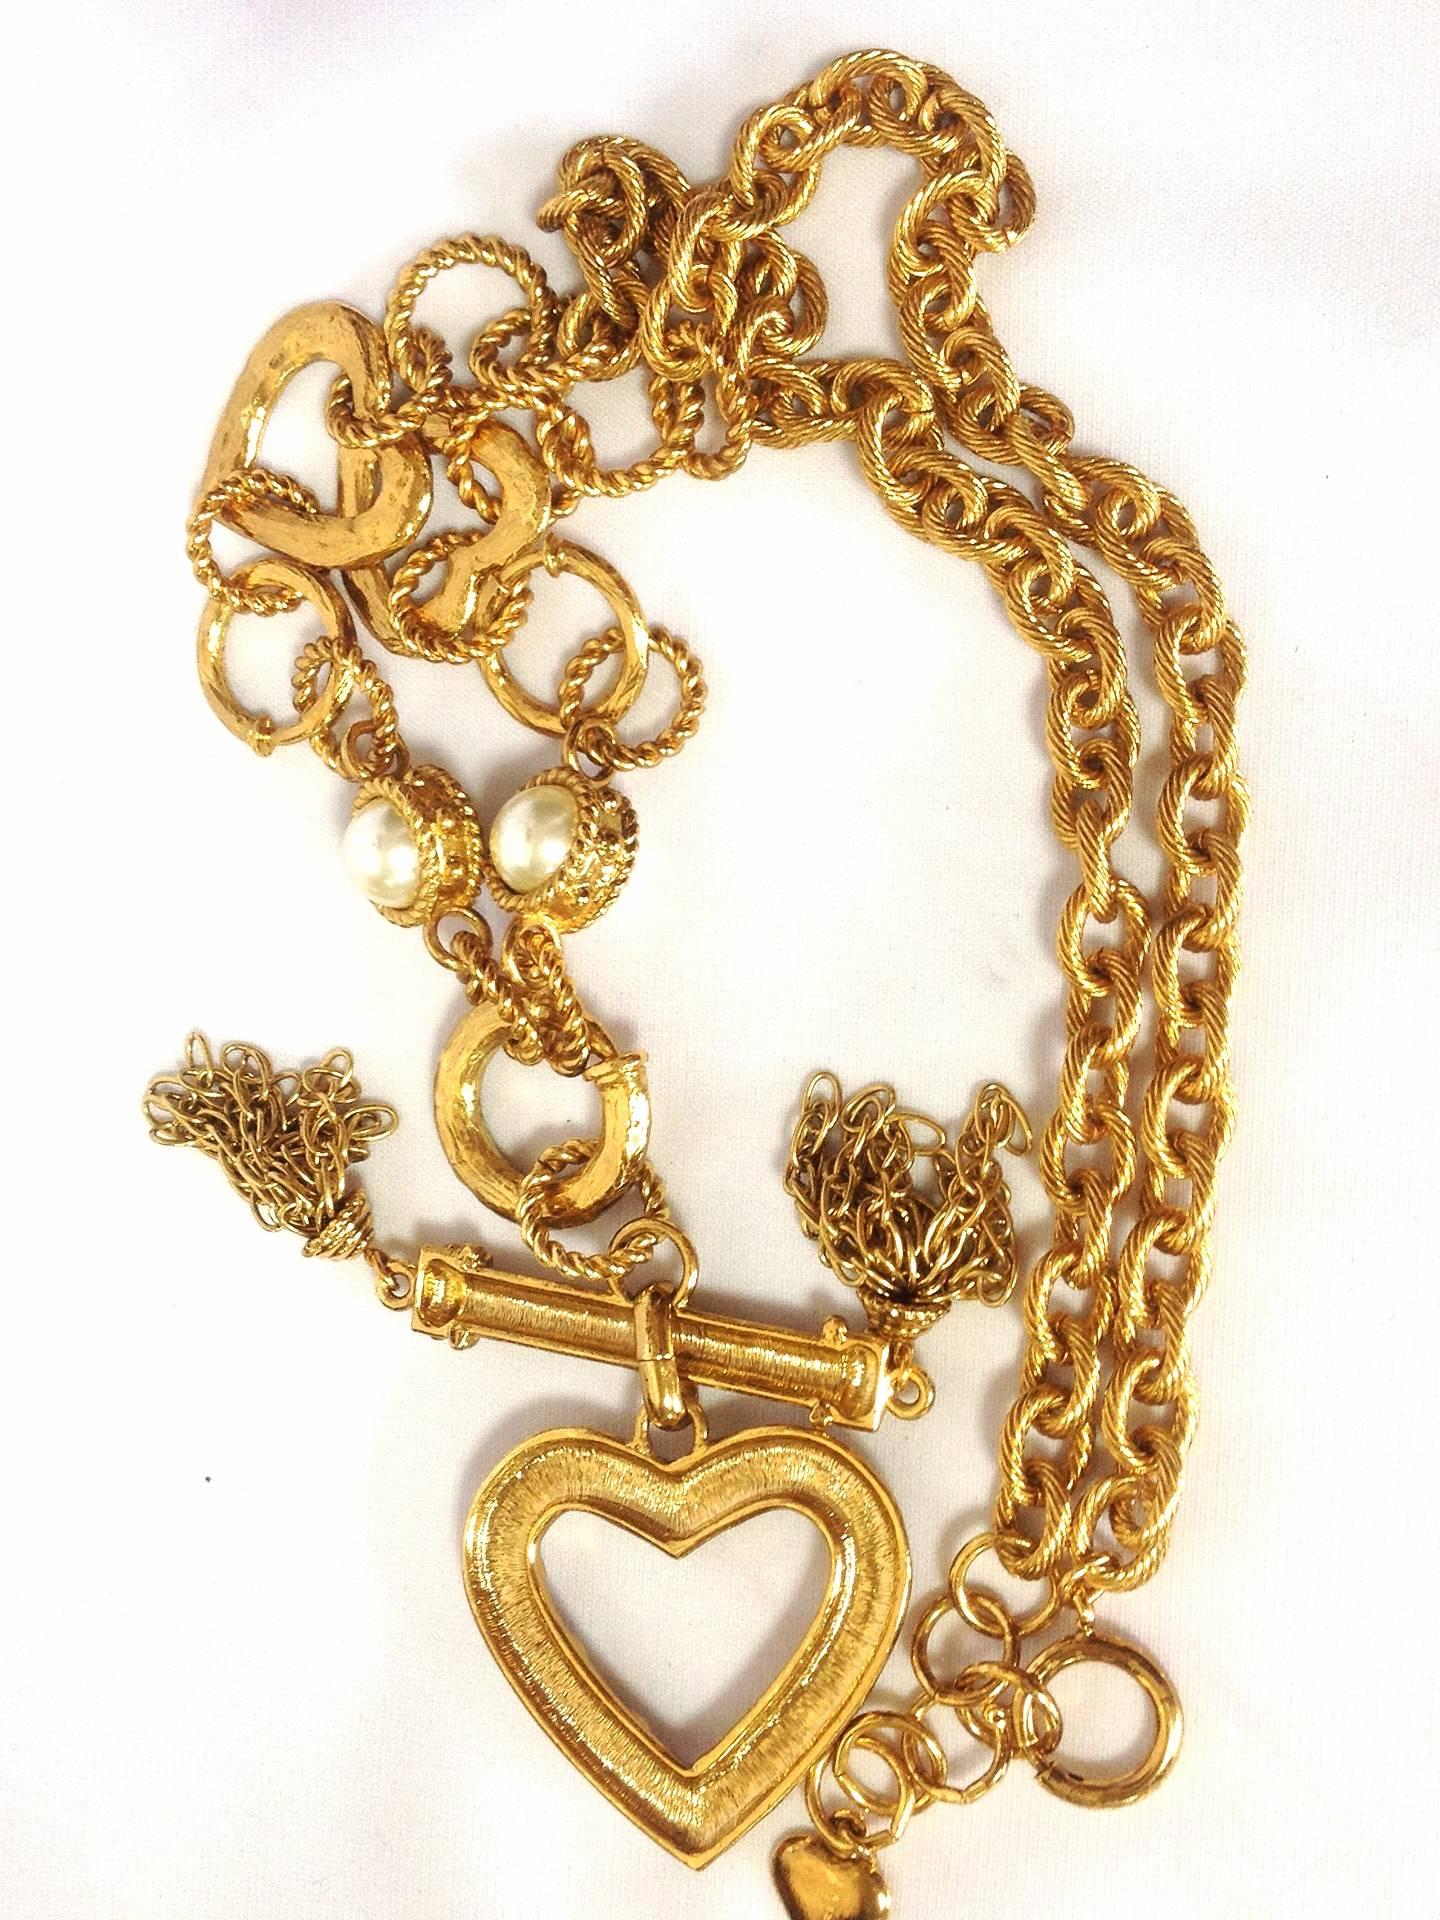 MINT. Vintage Moschino thick chain statement necklace with large heart charm For Sale 4